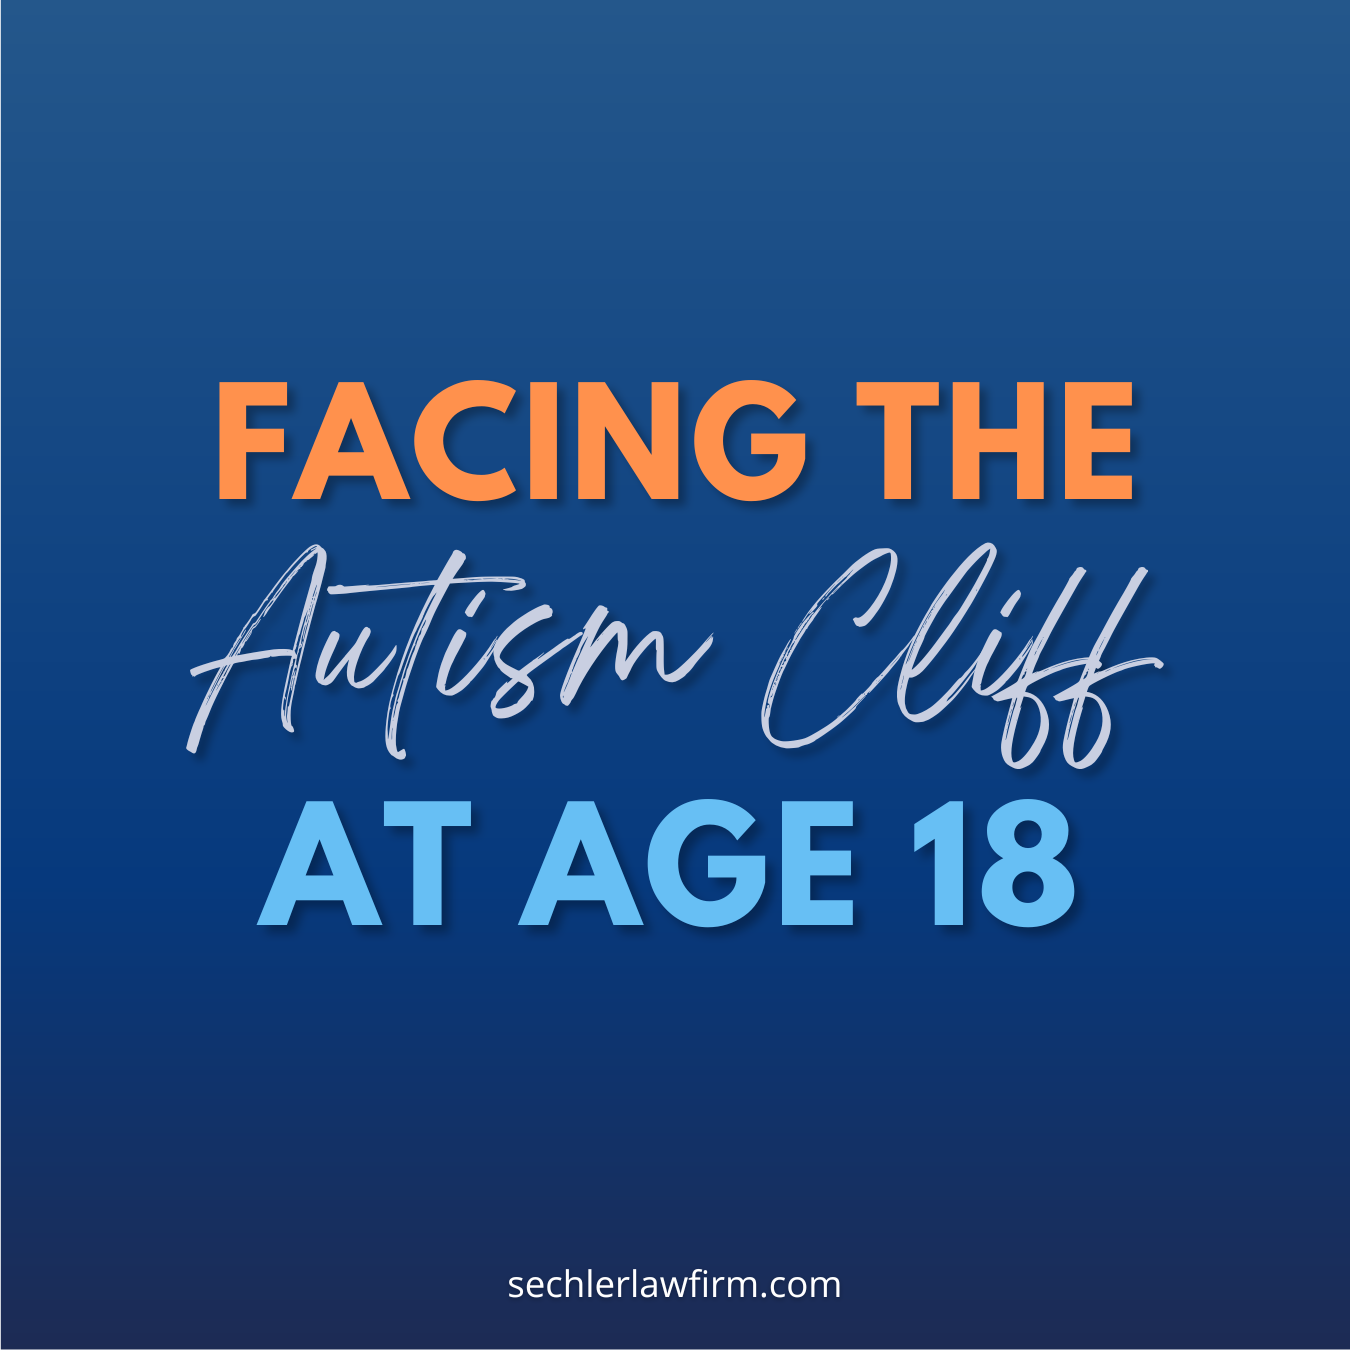 World Autism Awereness Month: Facing the ‘Autism Cliff’ at Age 18